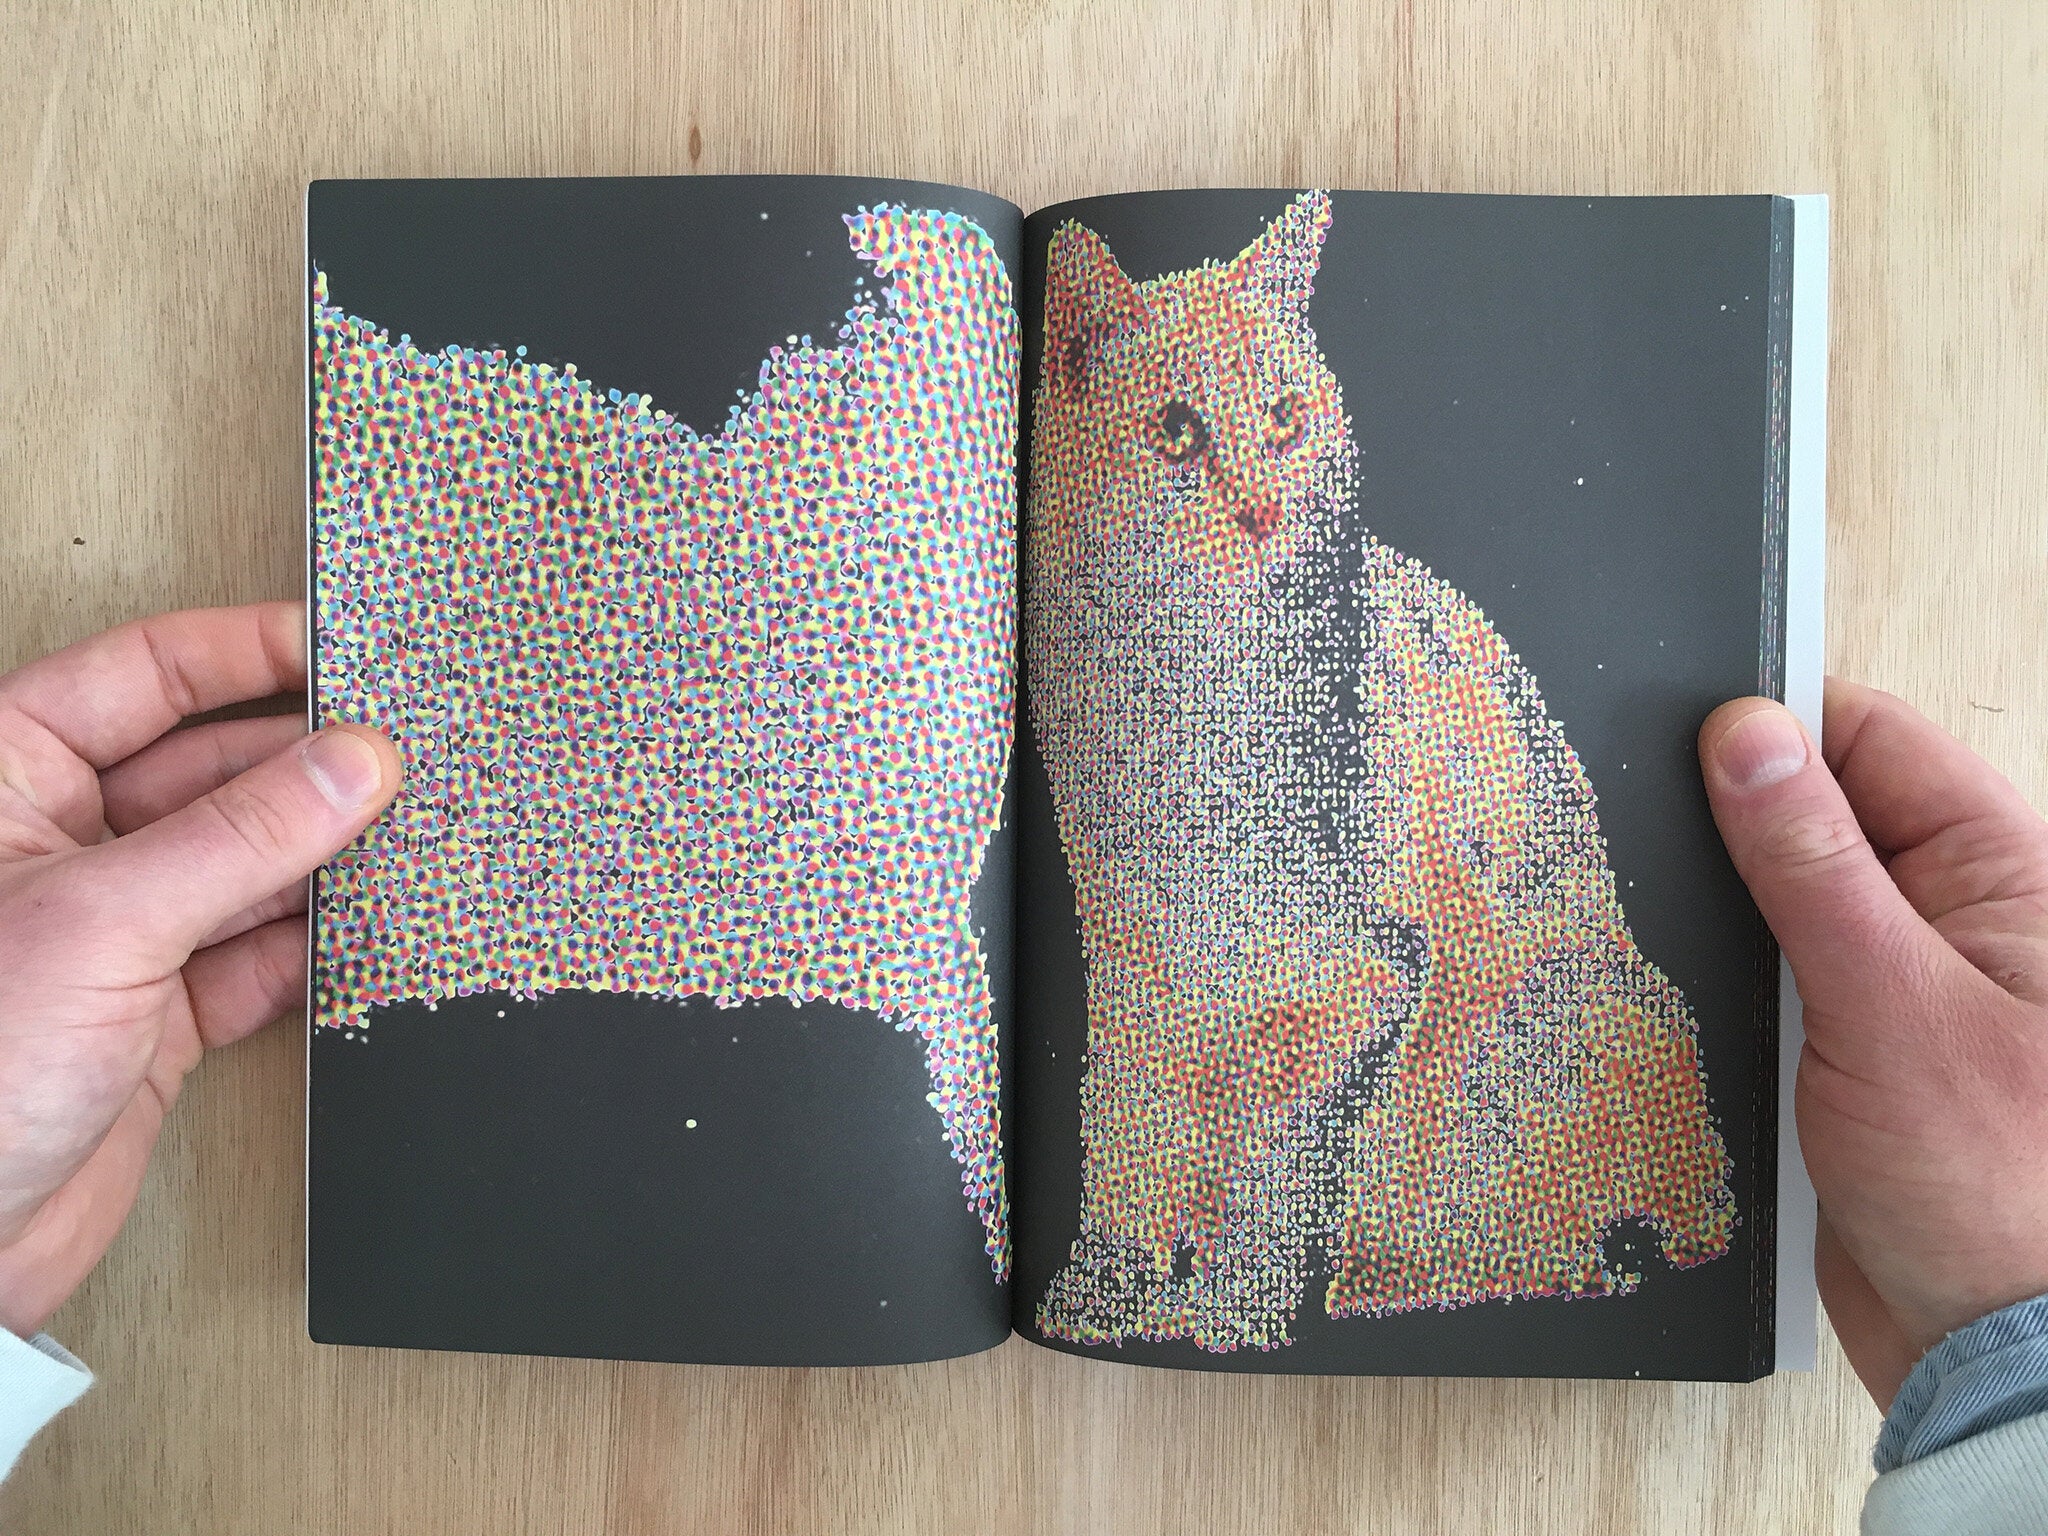 THE TRUTH ABOUT CATS & DOGS by Zak Kitnick & Ed Halter